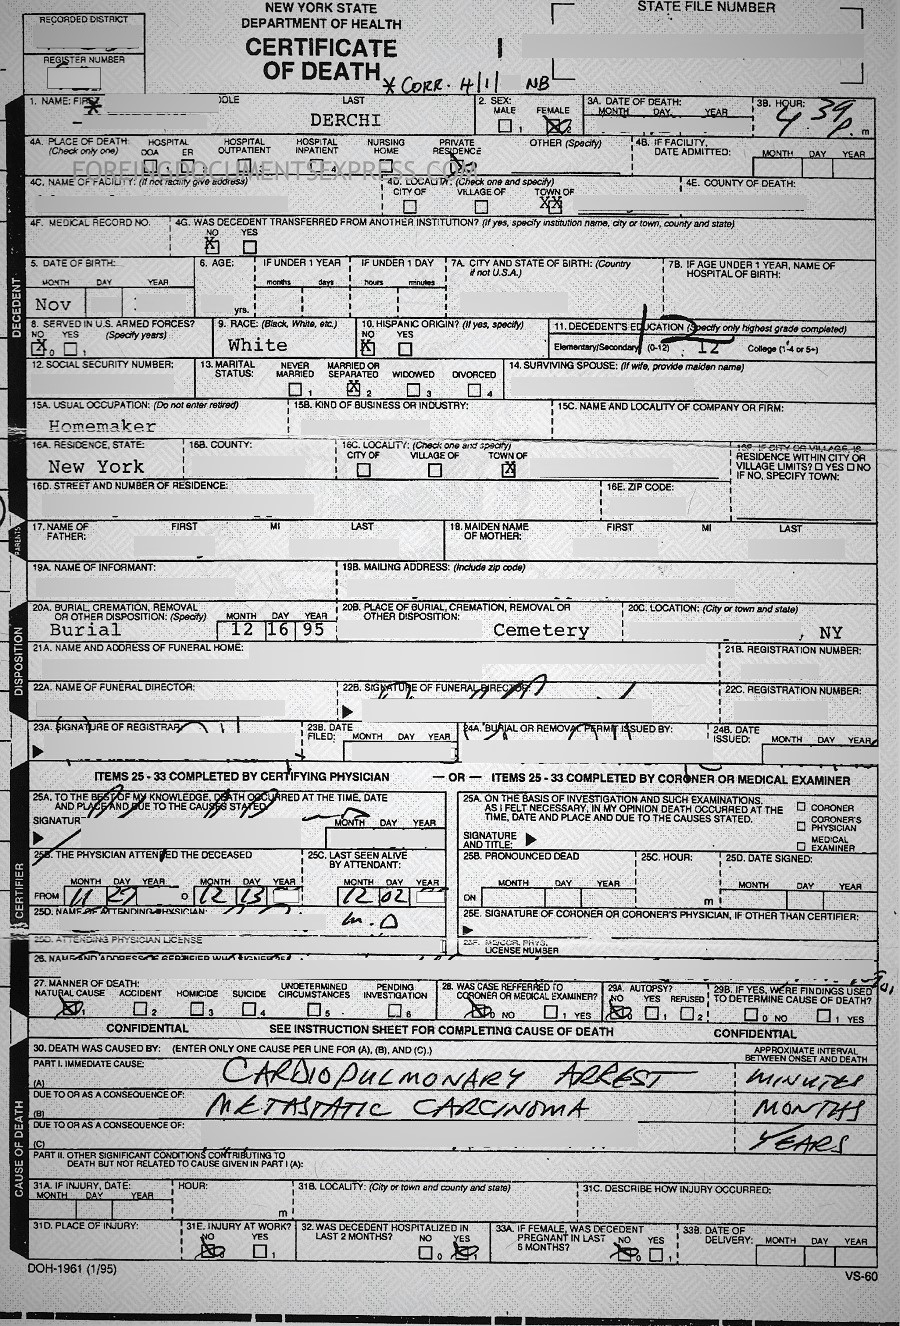 death certificate new york albany 2